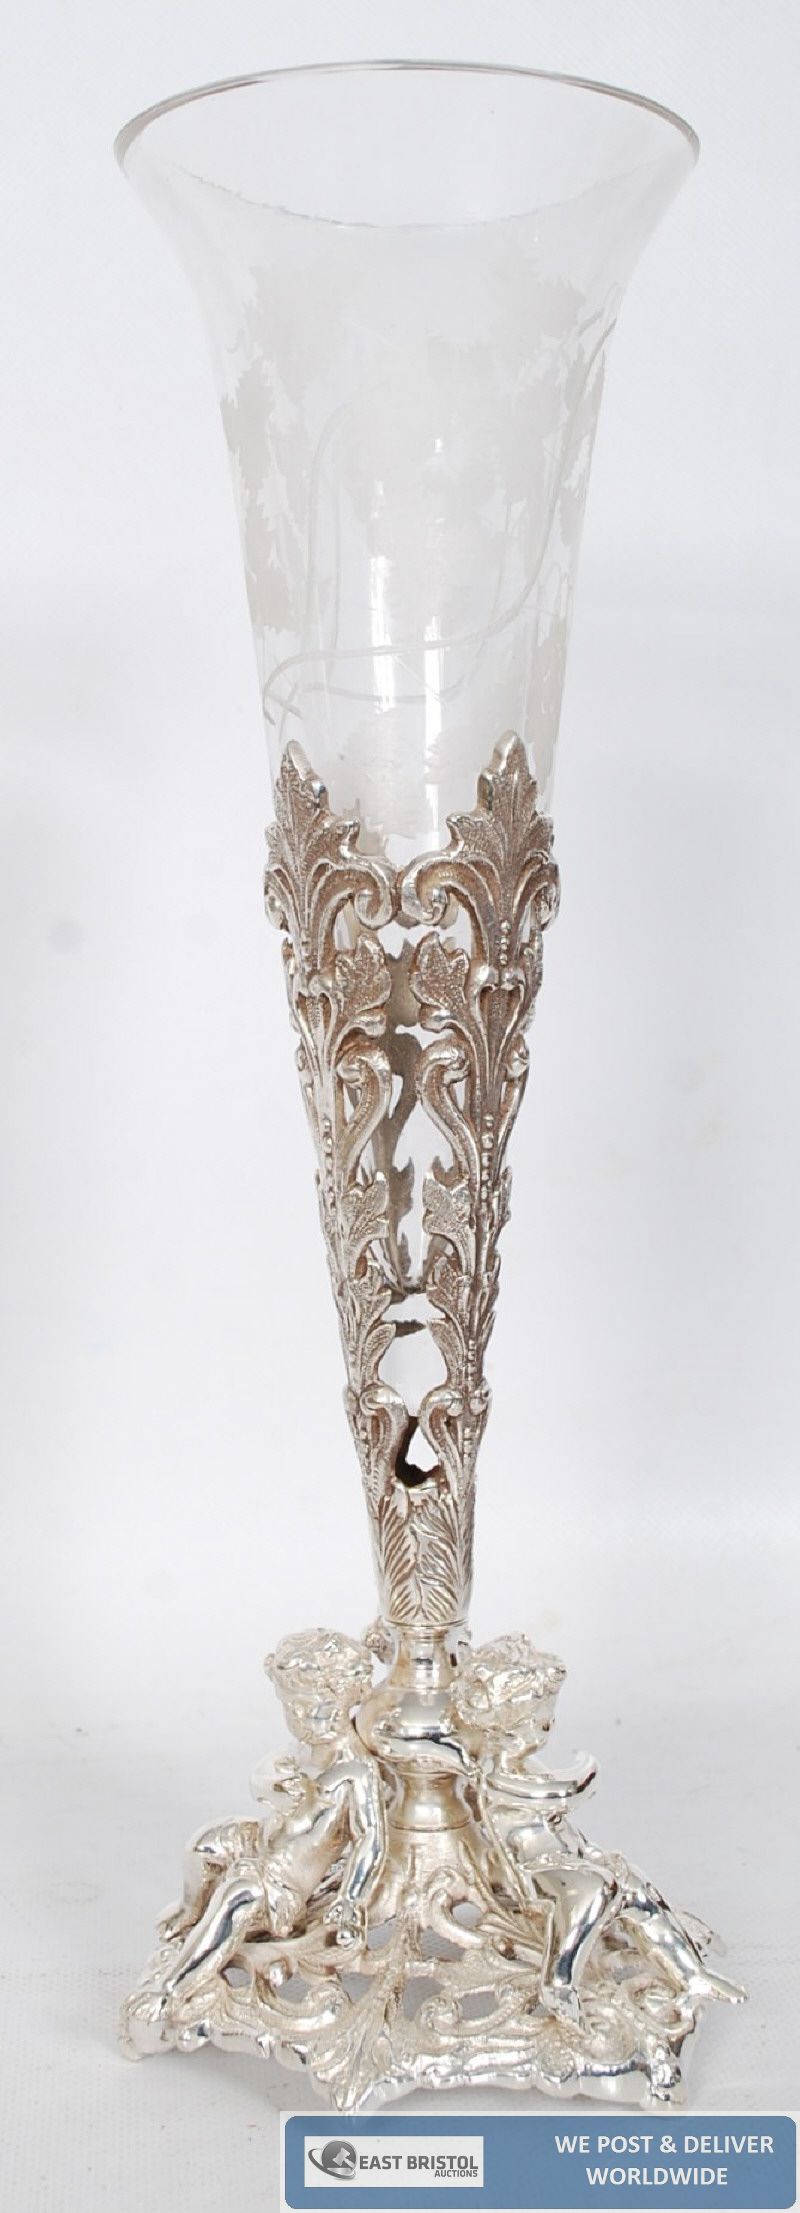 A silver plated trumpet vase